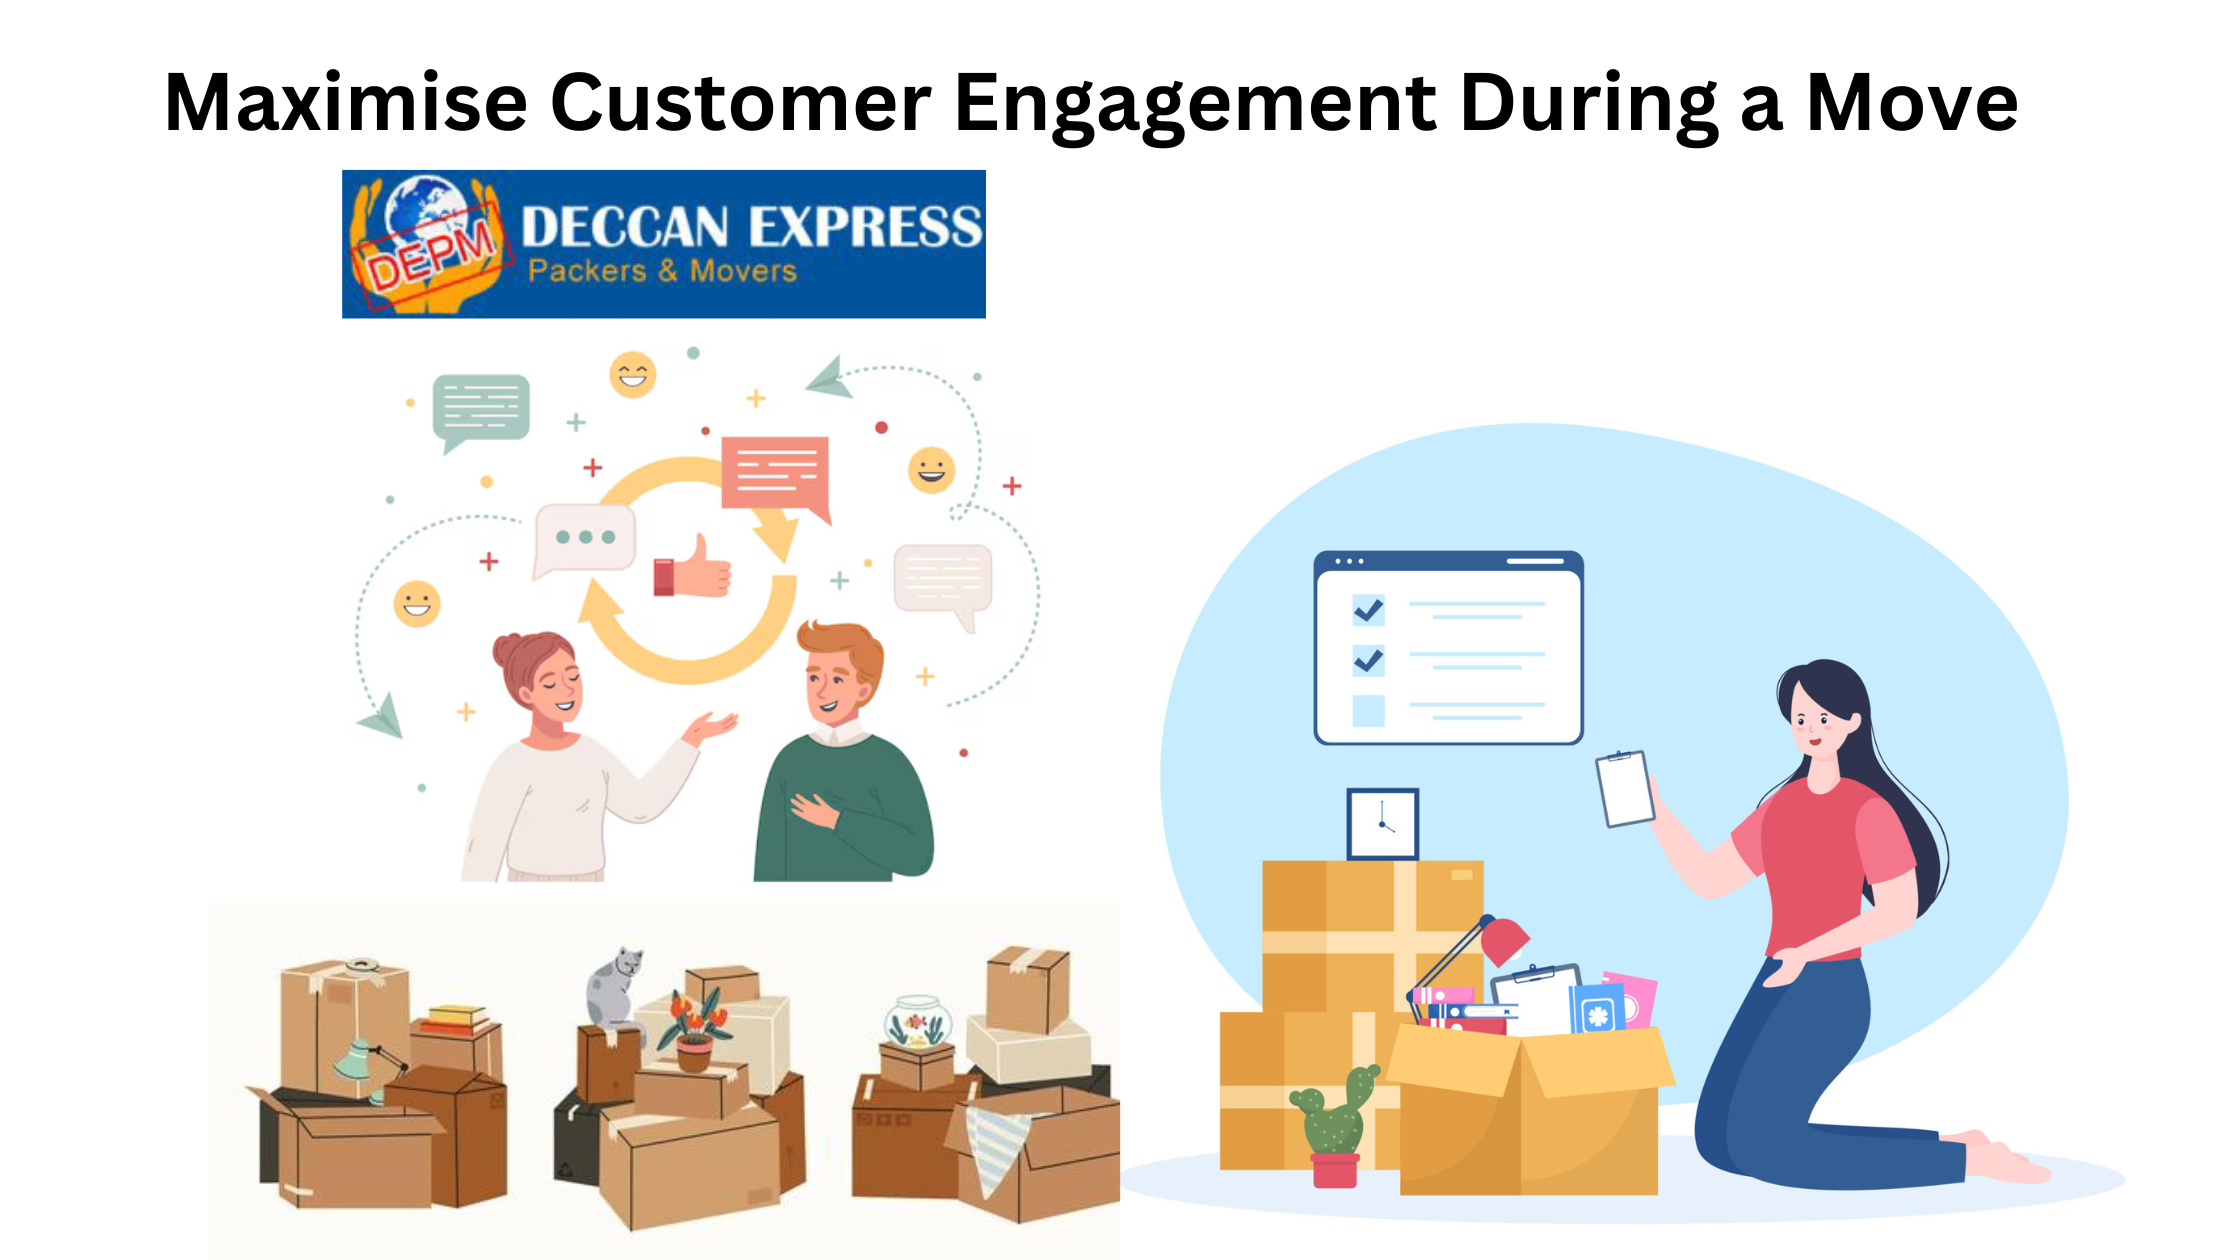 How to maximise customer engagement during a move?